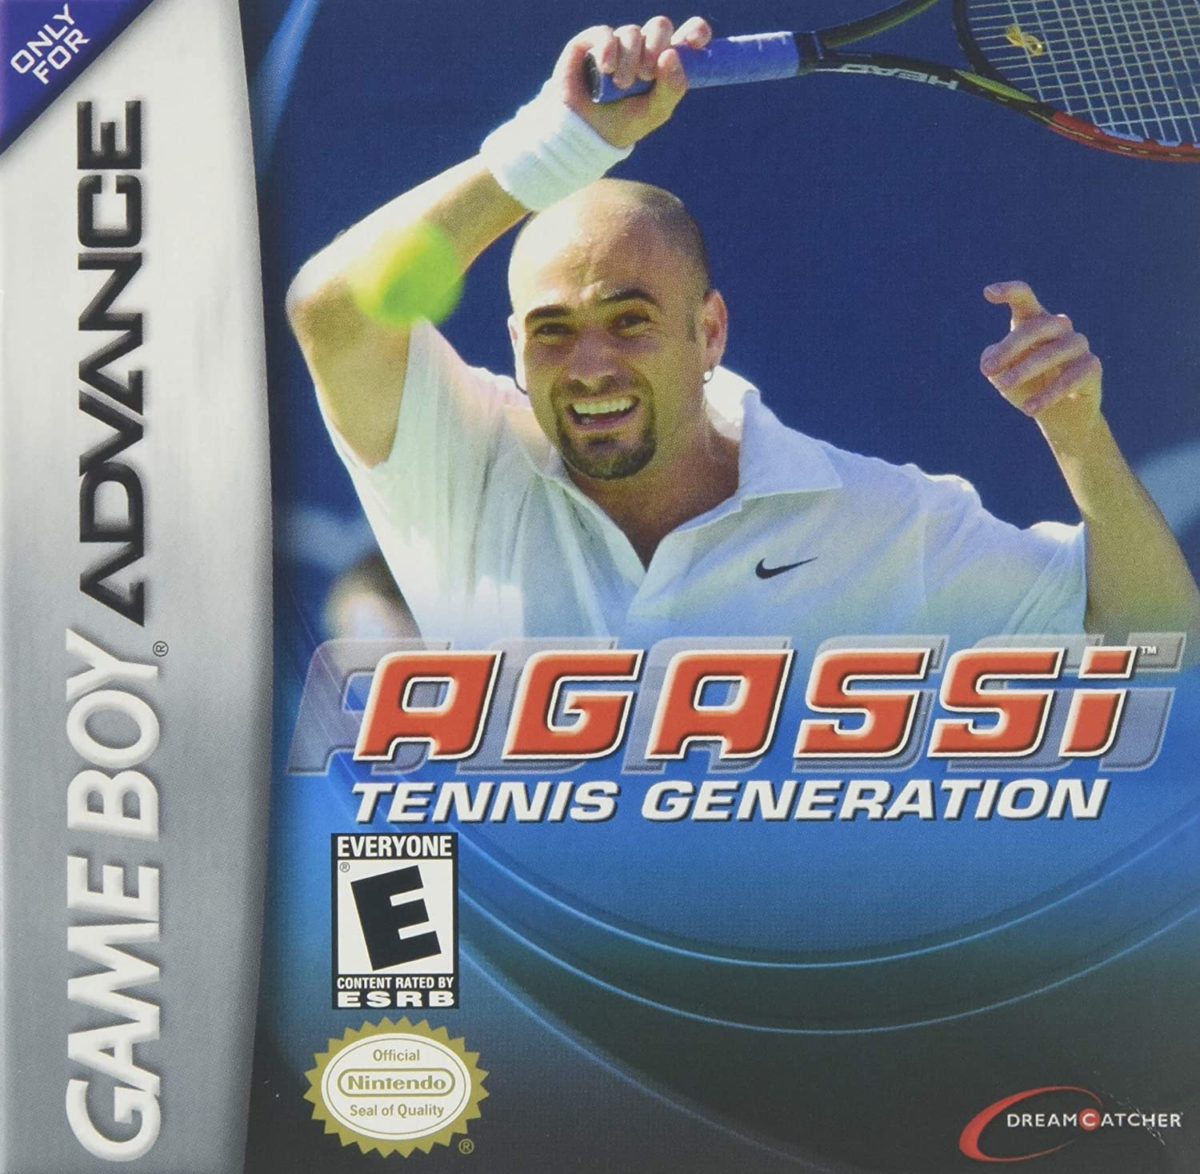 Agassi Tennis Generation player count stats